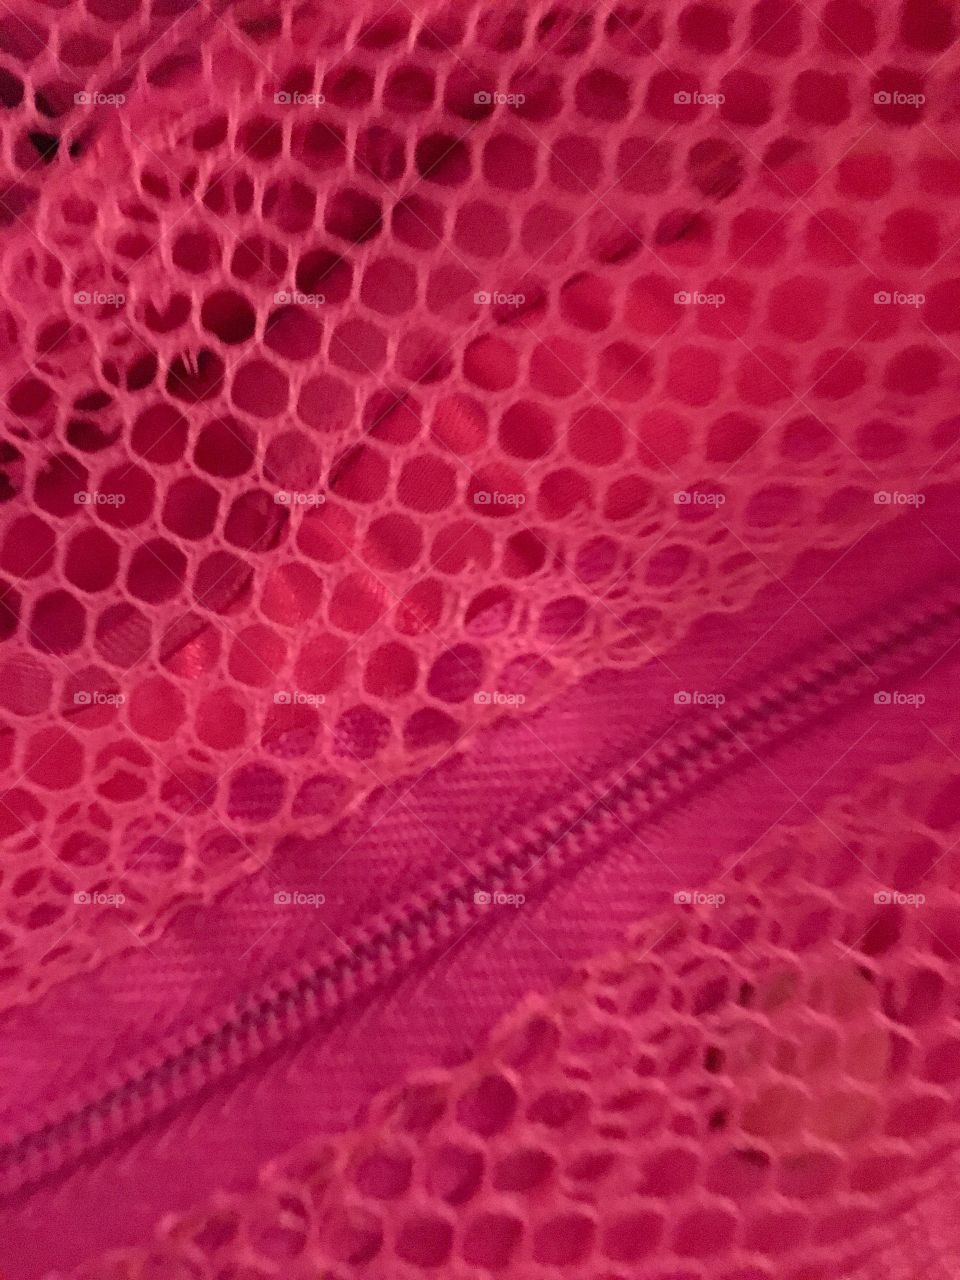 Extreme close-up of abstract pink pattern